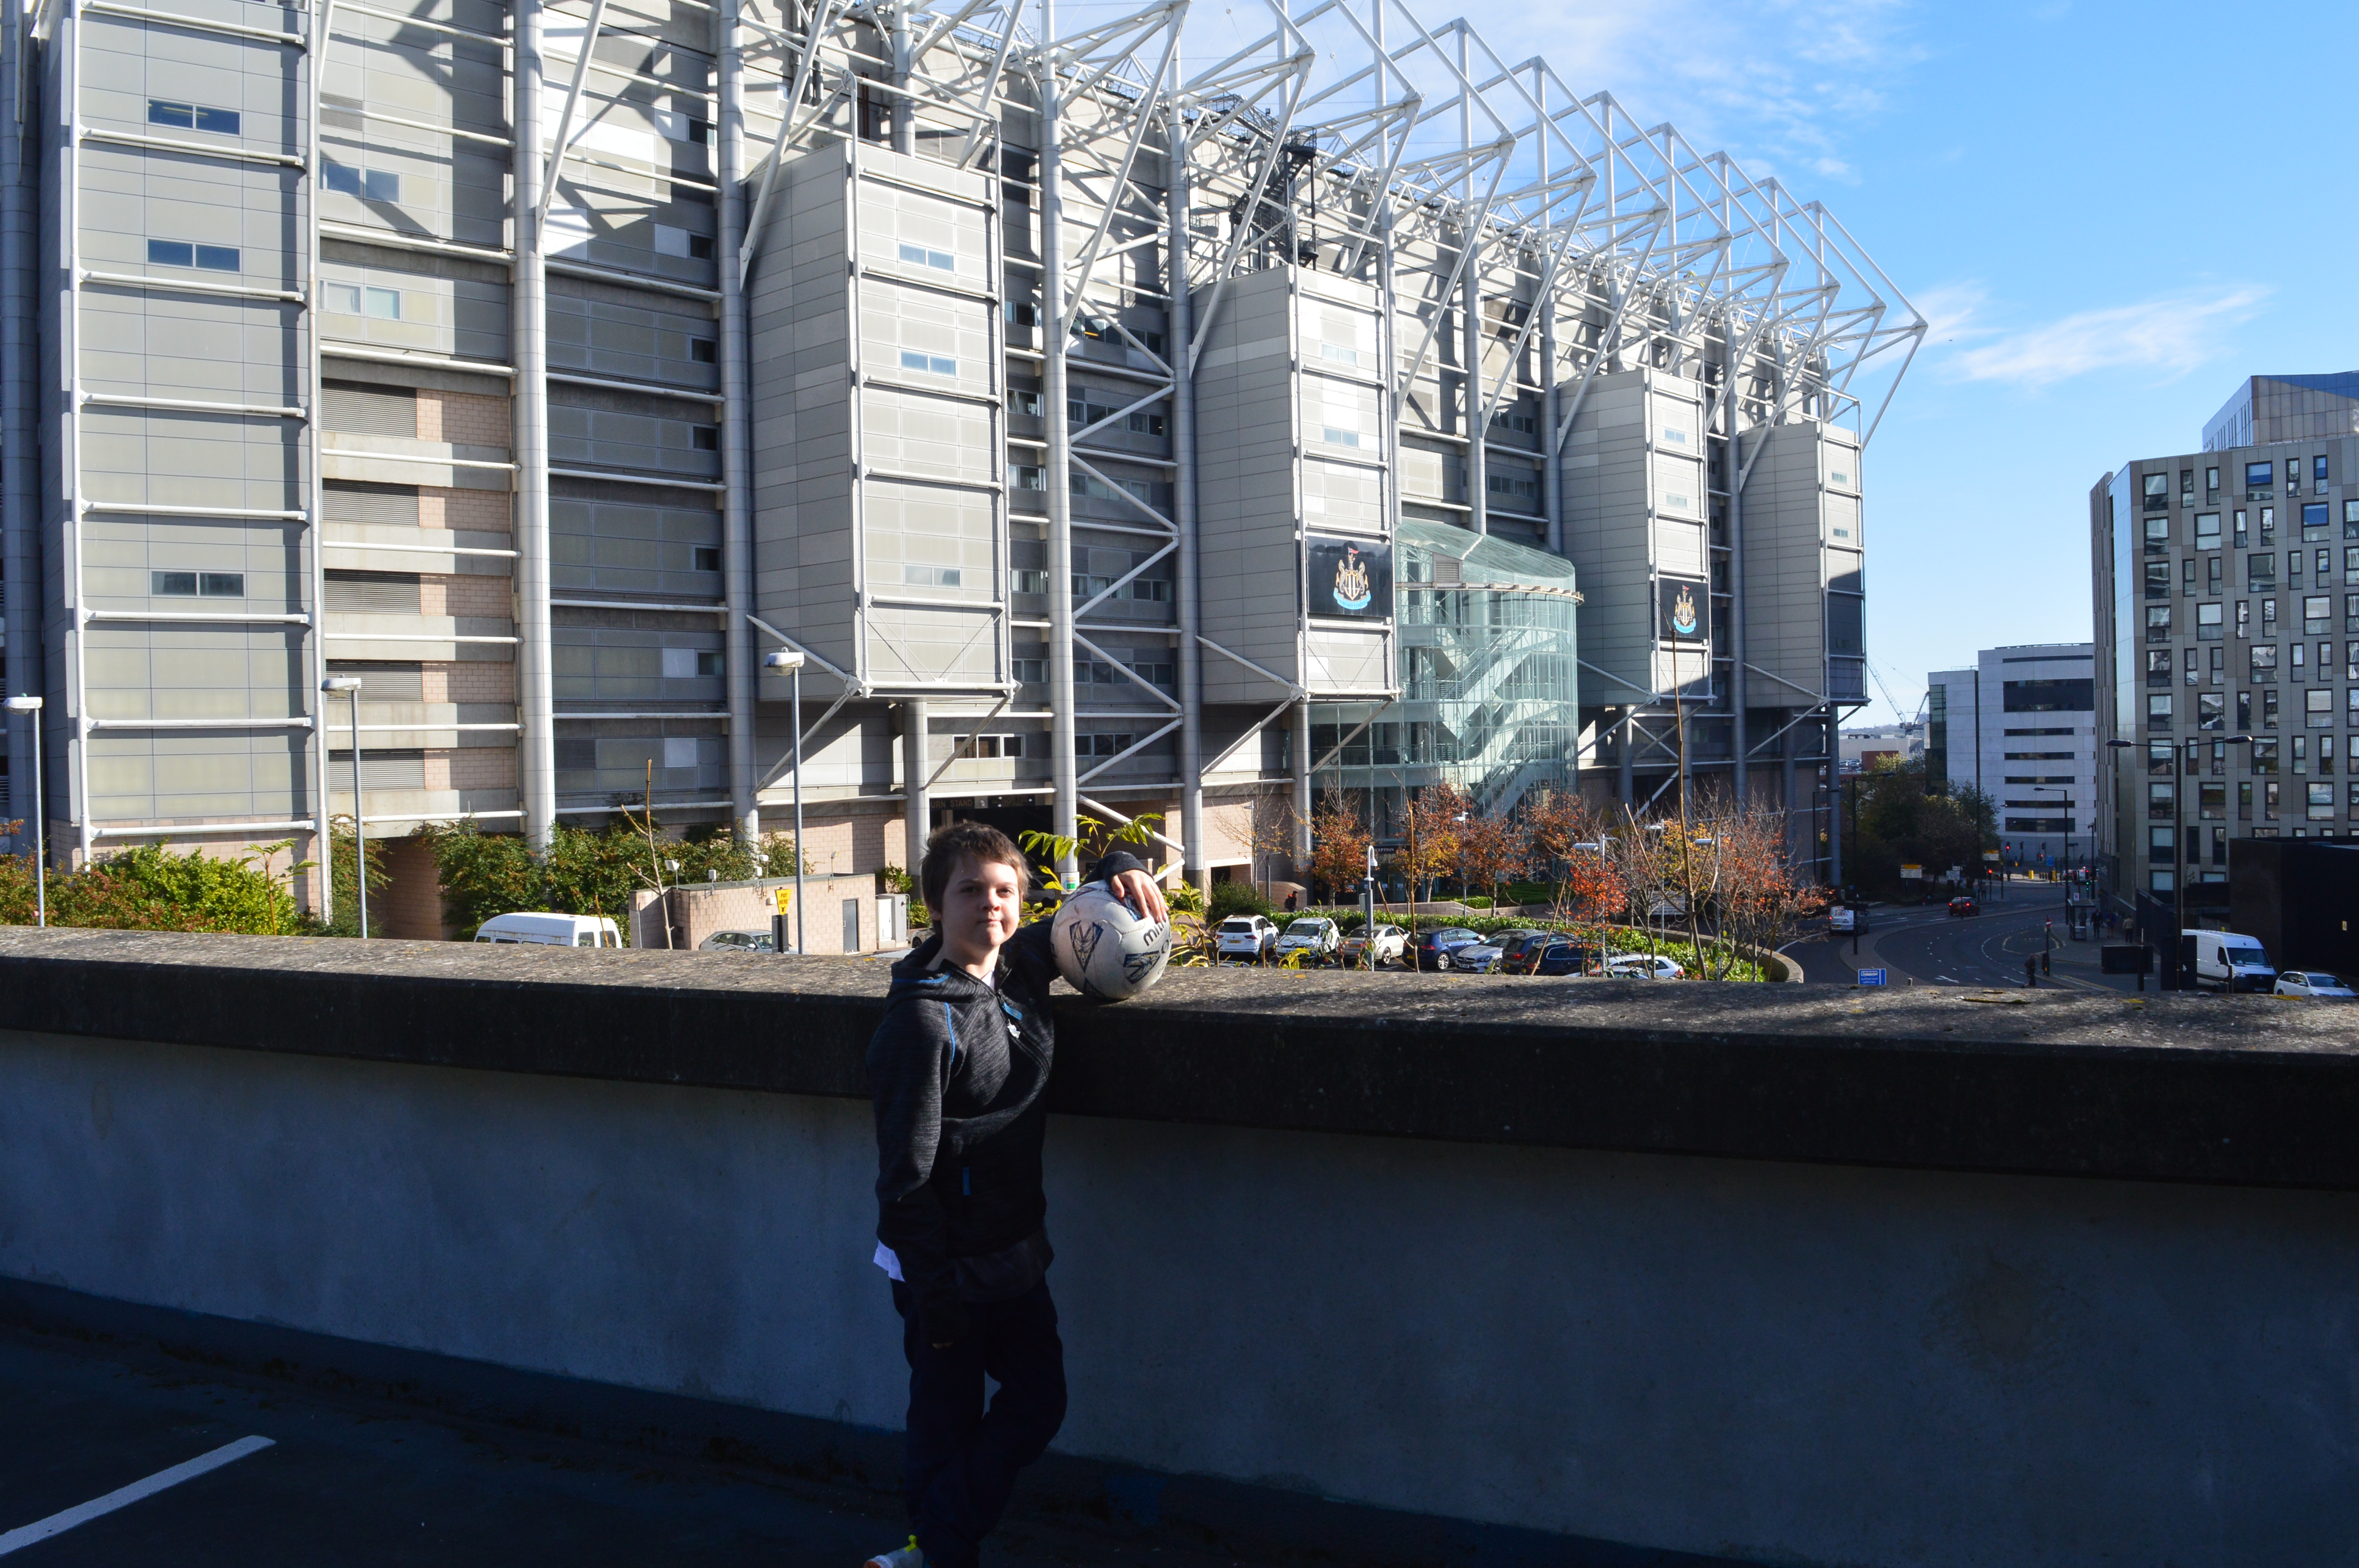 A day trip to Newcastle means a photo with Newcastle Football stadium in the background